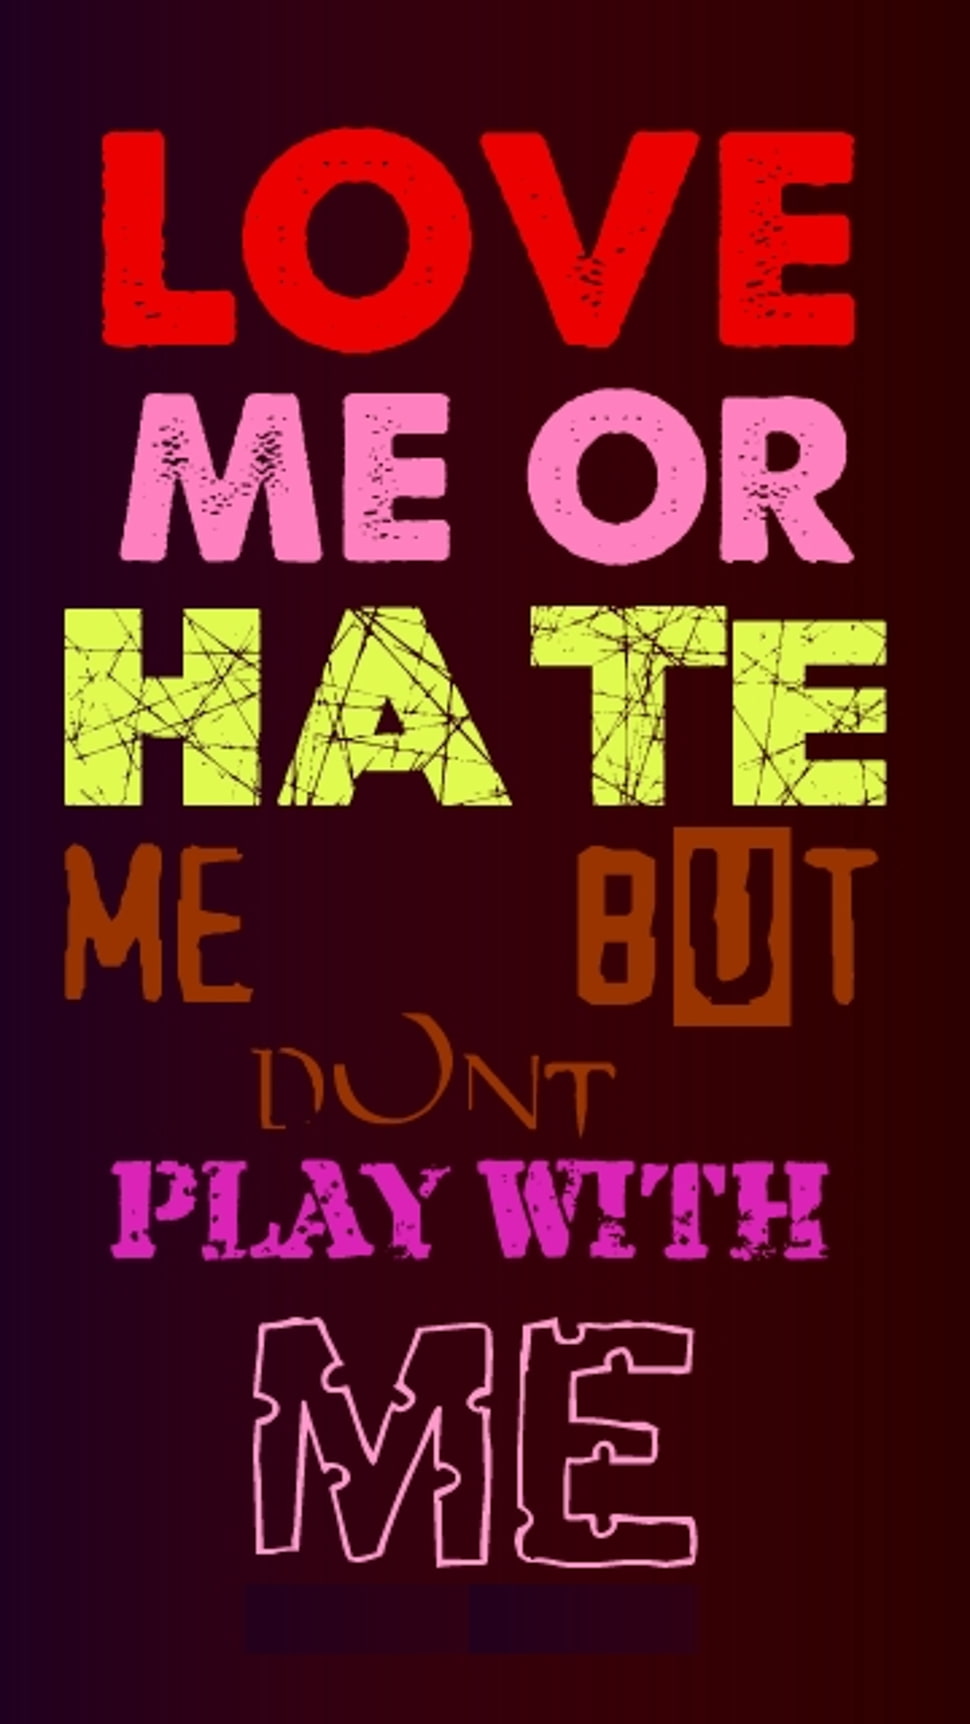 Hate me but dont HD wallpaper | Wallpaper Flare